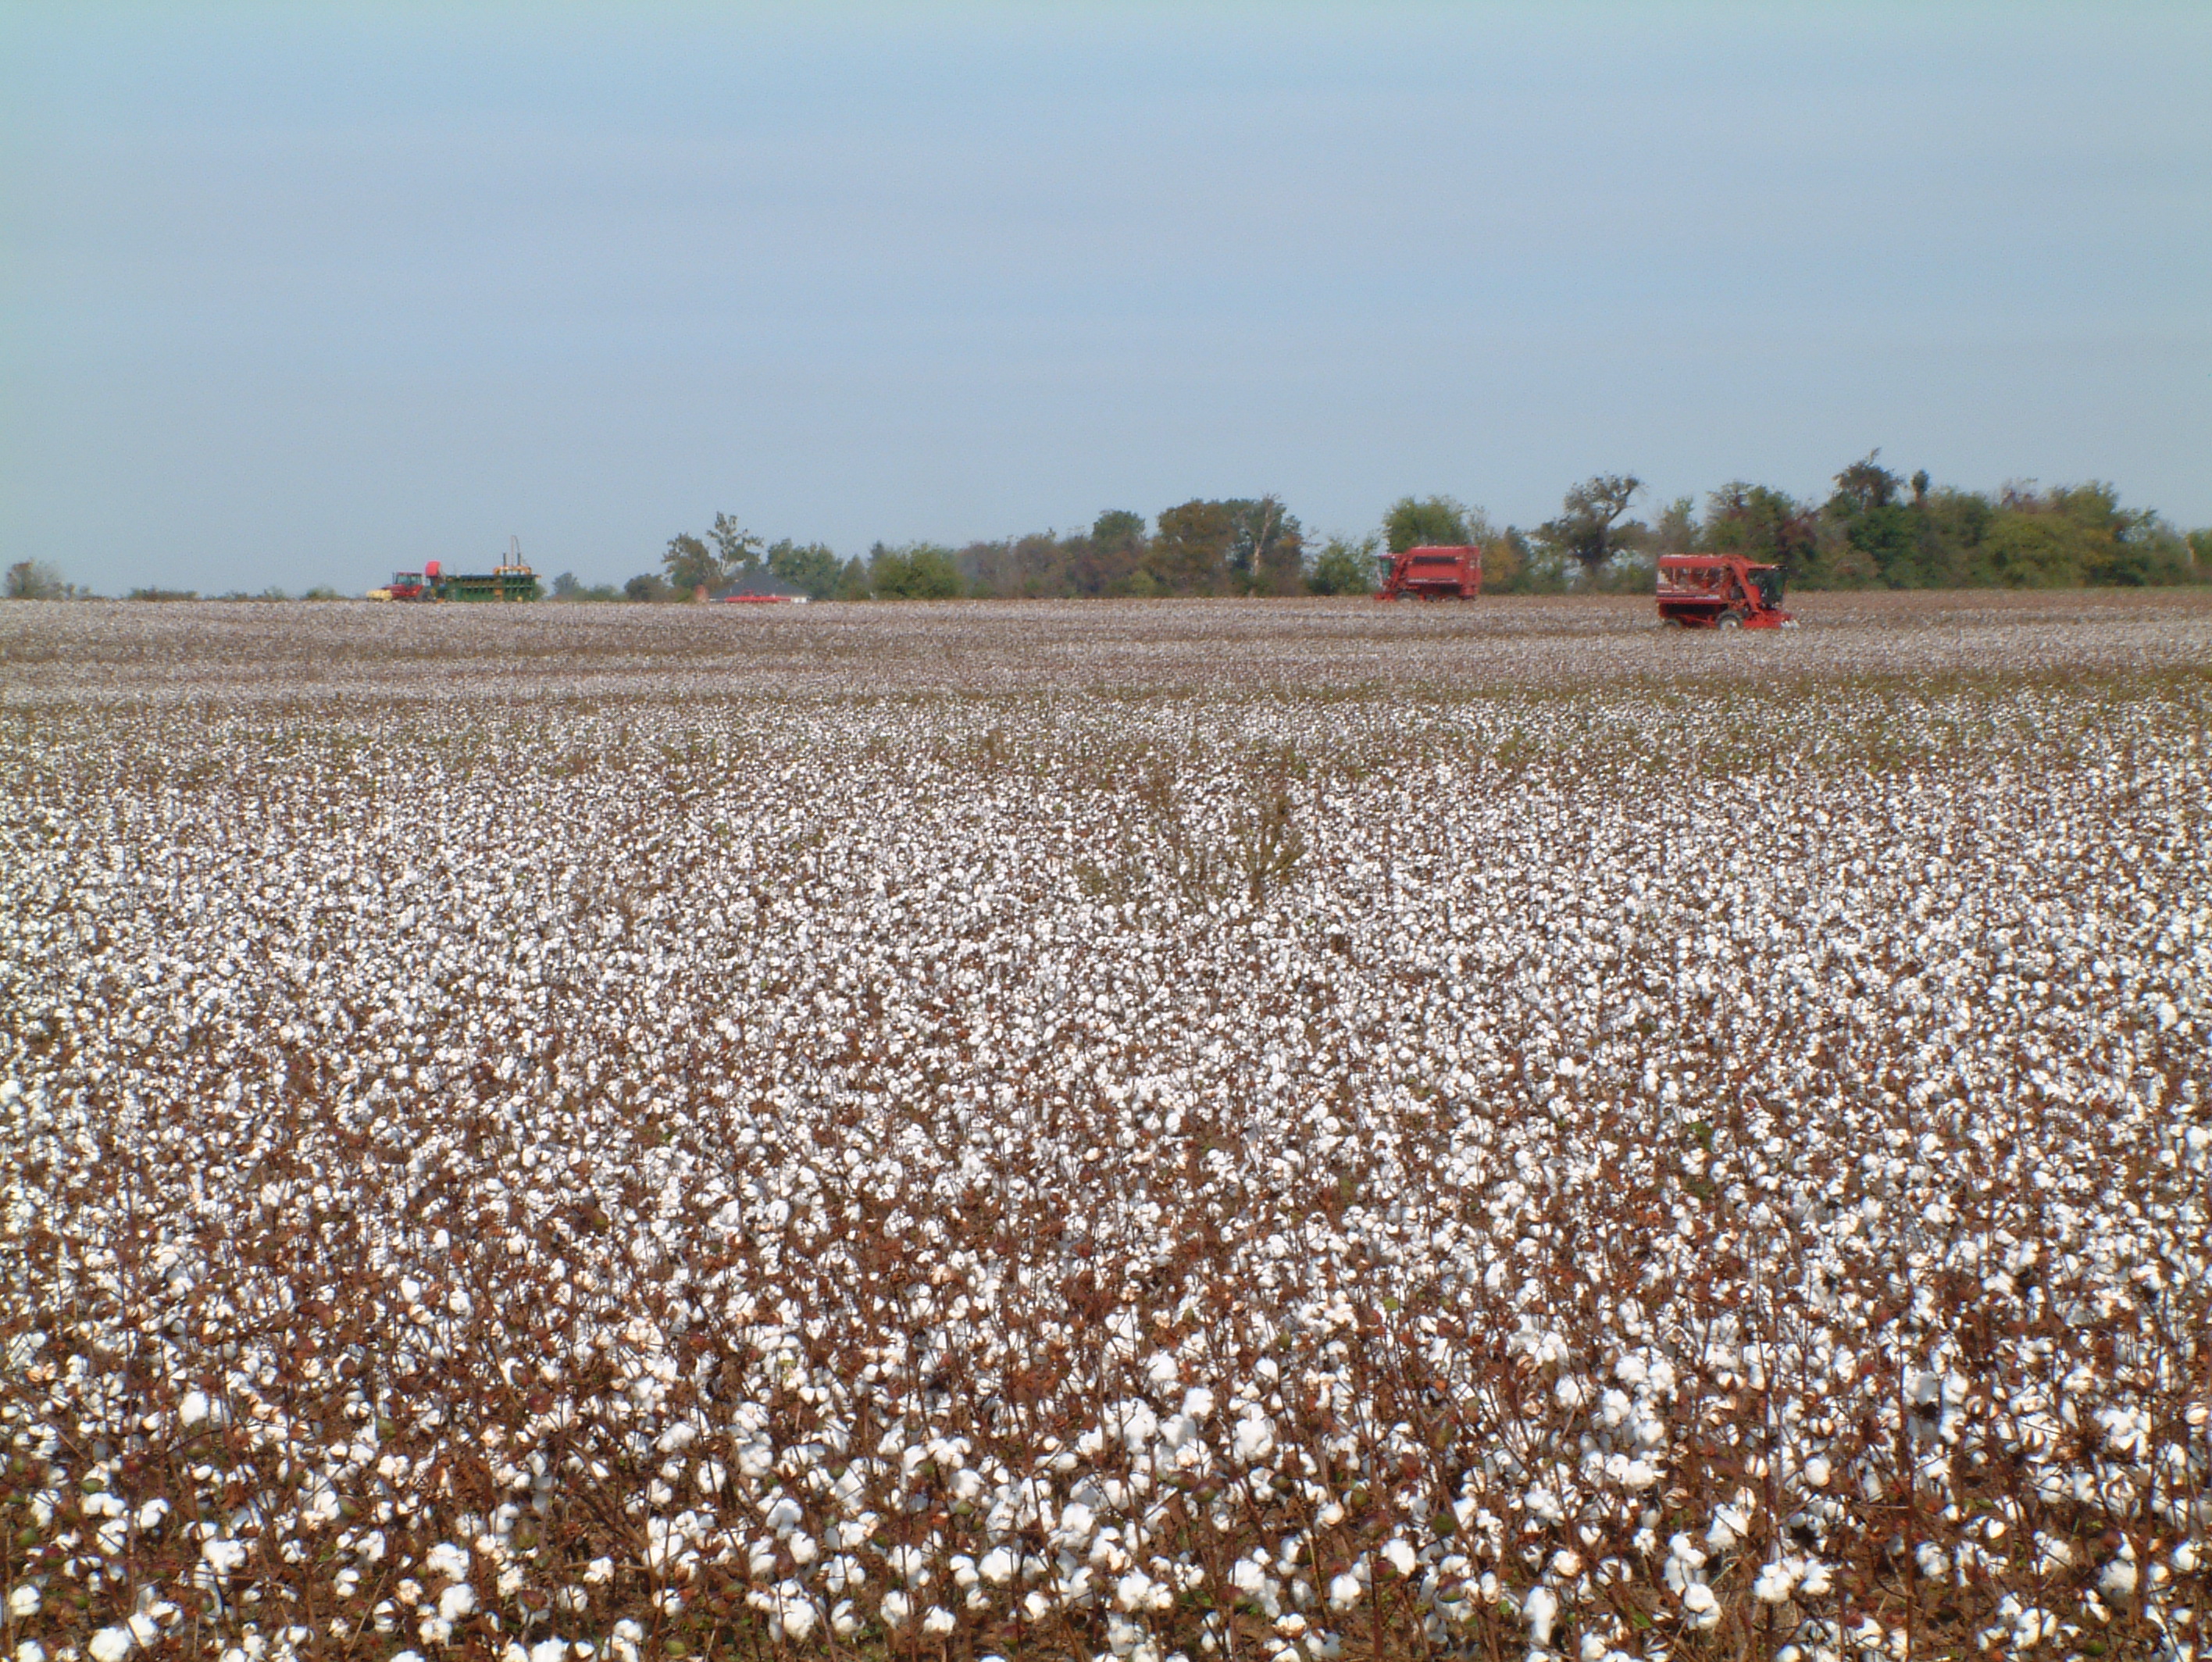 Cotton pickers traverse each field multiple rows at a time.